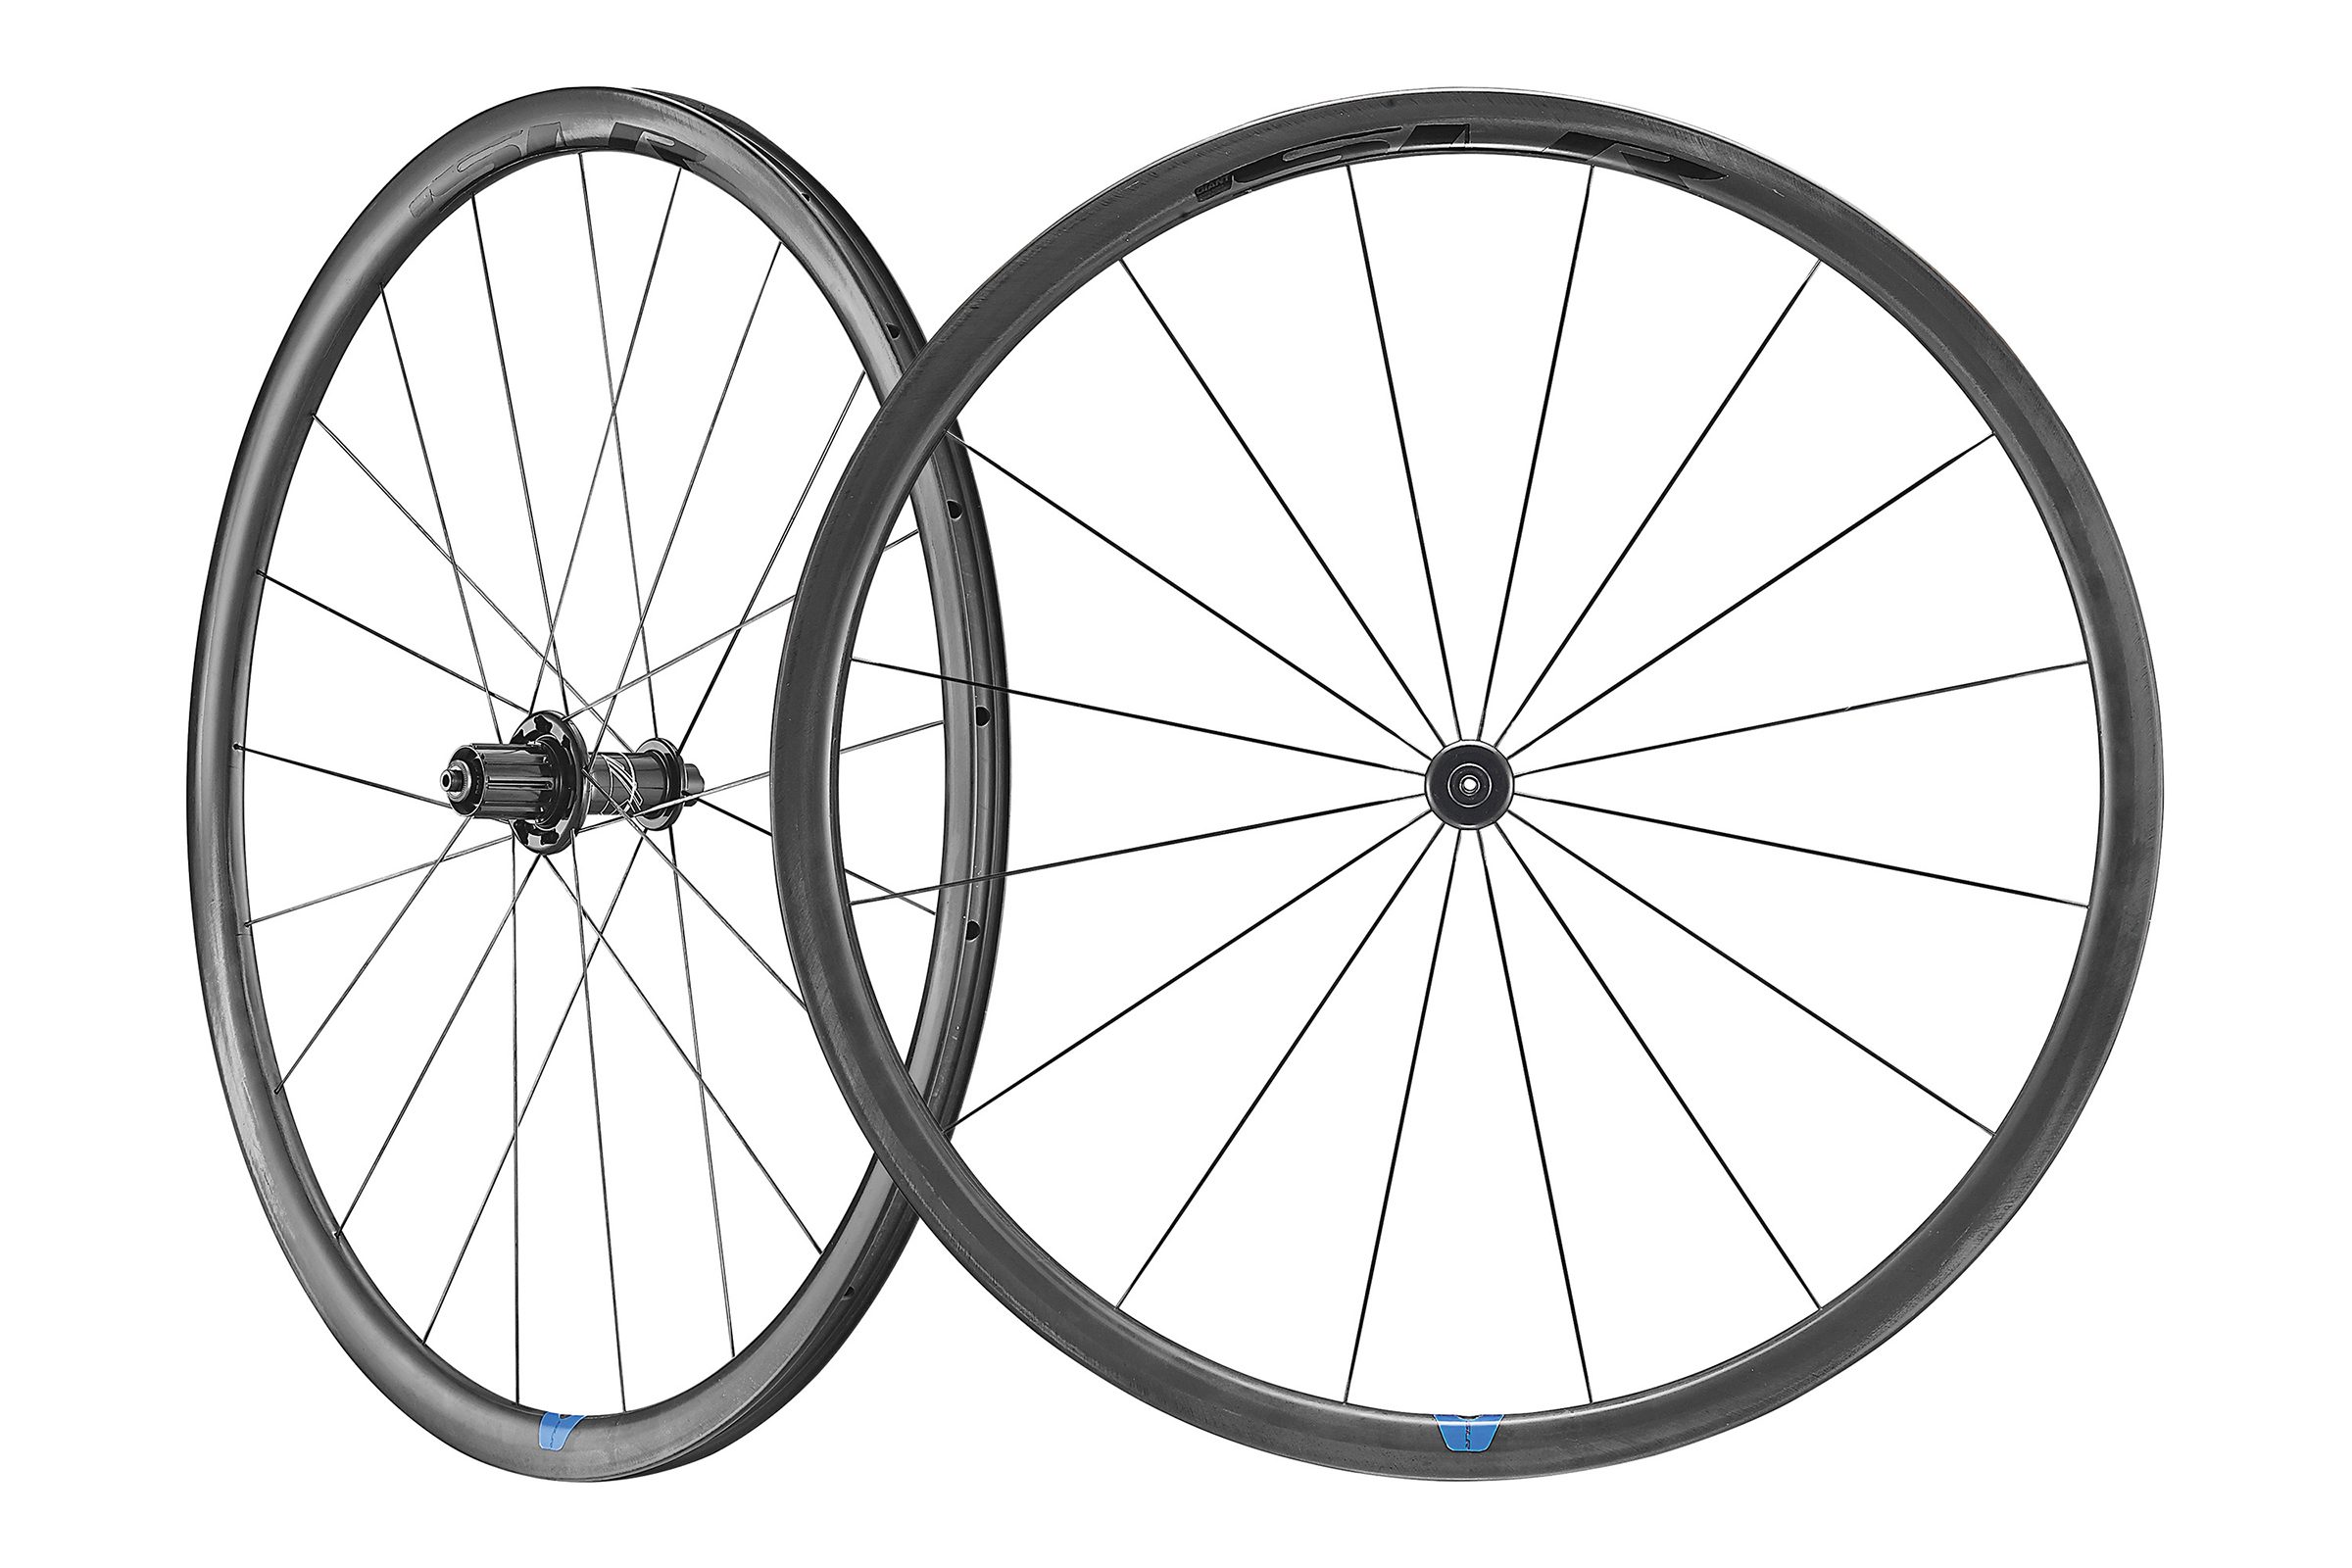 Giant Carbon Wheelset Top Sellers, 51% OFF | www.ingeniovirtual.com